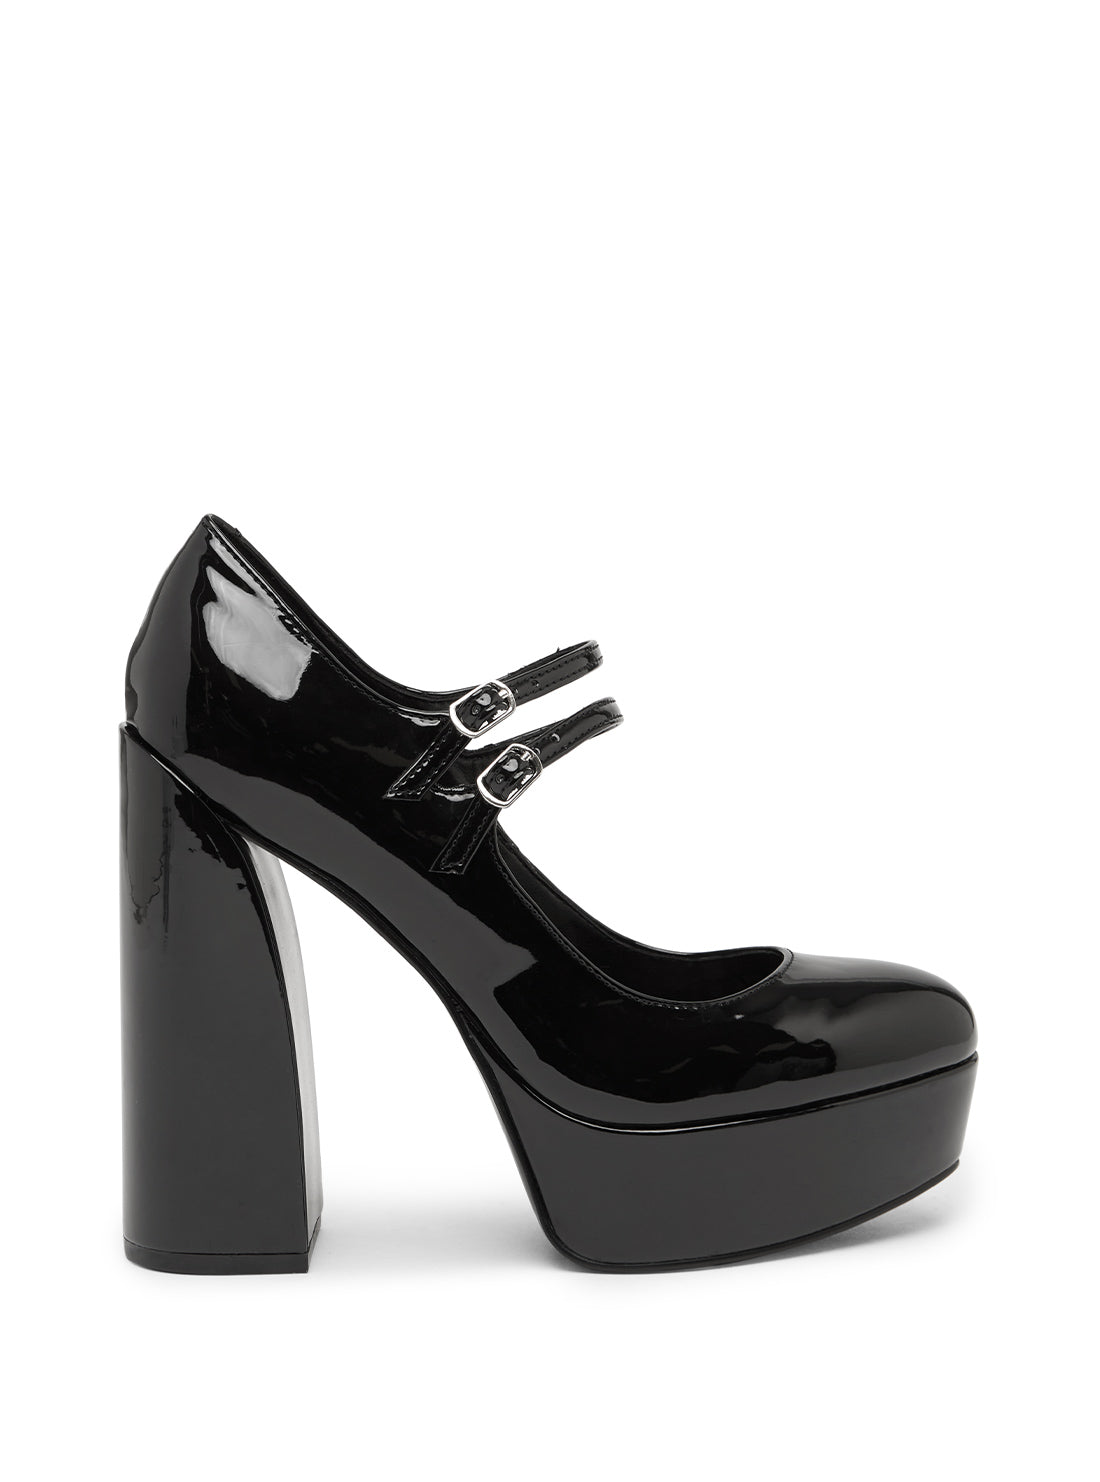 GUESS Women's Black Patent Callyna Heels CALLYNA Side View